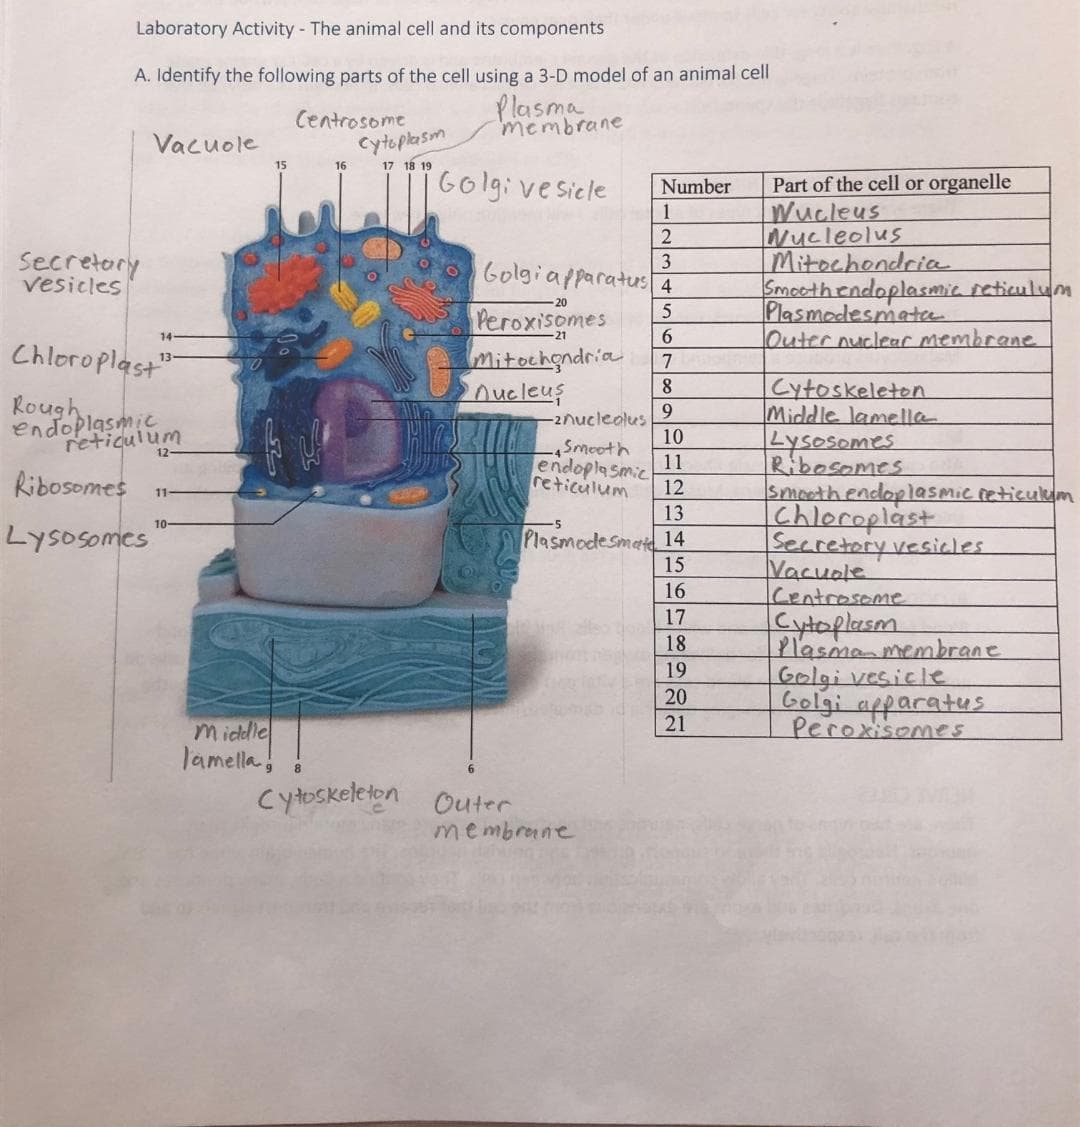 Laboratory Activity - The animal cell and its components
A. Identify the following parts of the cell using a 3-D model of an animal cell
Plasma
Centrosome
membrane
Vacuole
Cytoplasm
15
16
17 18 19
160lg:vesicle
Part of the cell or organelle
Wucleus
Nucleolus
Mitochondria
Smoothendoplasmic reticulum
Plasmodesmatee
Outernuclear membrane
Number
1
2
Secretory
vesicles
3
Golgiapparatus4
20
Peroxisomes
Mitochgndria
nucleus
14
6.
Chloroplast"
7
8
Cytoskeleton
Middle lamella
Lysosomes
Ribosomes
smoothendoplasmic reticulum
Chleroplast
Secretory vesieles
Vacuole
Centrosome
Cytoplasm
Plasman membrane
Golgi vesicle
Golgi apparatus
Peroxisomes
Rough
endoplasmic
reticulum
9.
-2nucleolus
10
Ribosomes
Smooth
11
endoplasmic
reticulum
12
11-
13
Lysosomes
10-
Plasmodesmat 14
15
16
17
18
19
20
21
Middle
lamella,
cytosketeton Outer
8.
membrane
